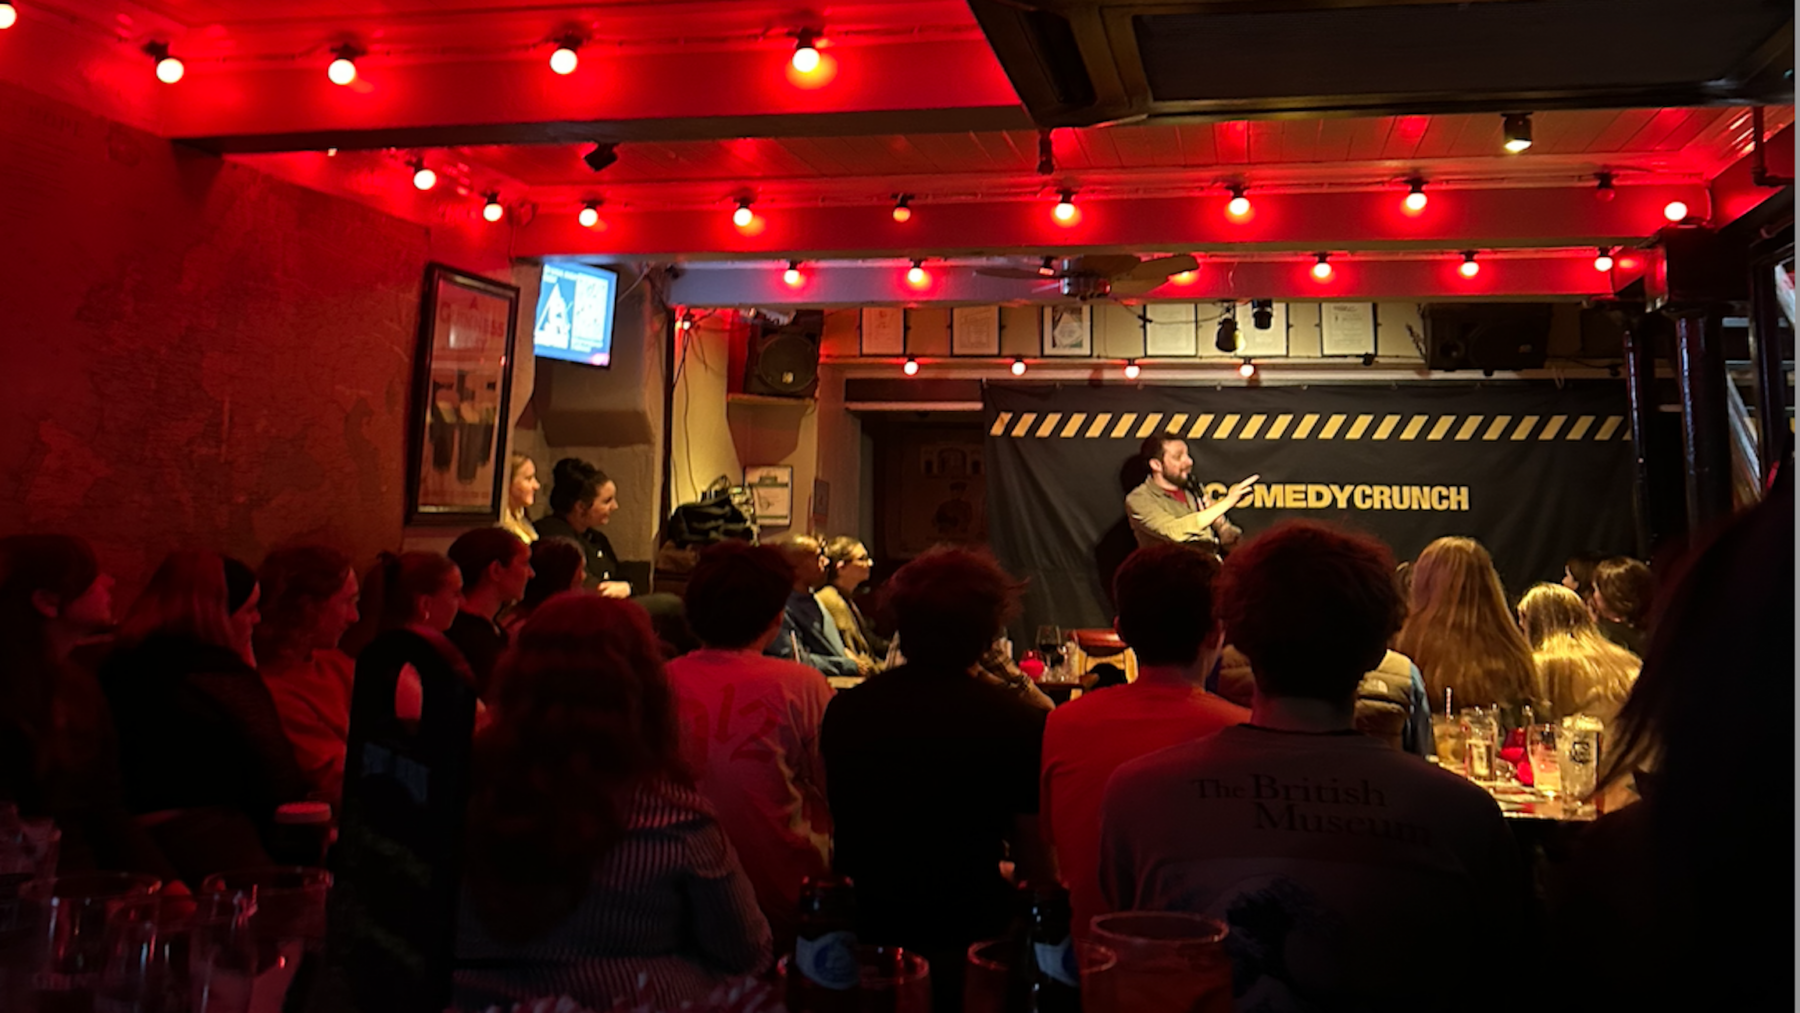 Comedian Danny O’Brien hosts the Comedy Crunch show on March 12 in Dublin’s Stag's Head bar. (Credit: Dina Katgara)